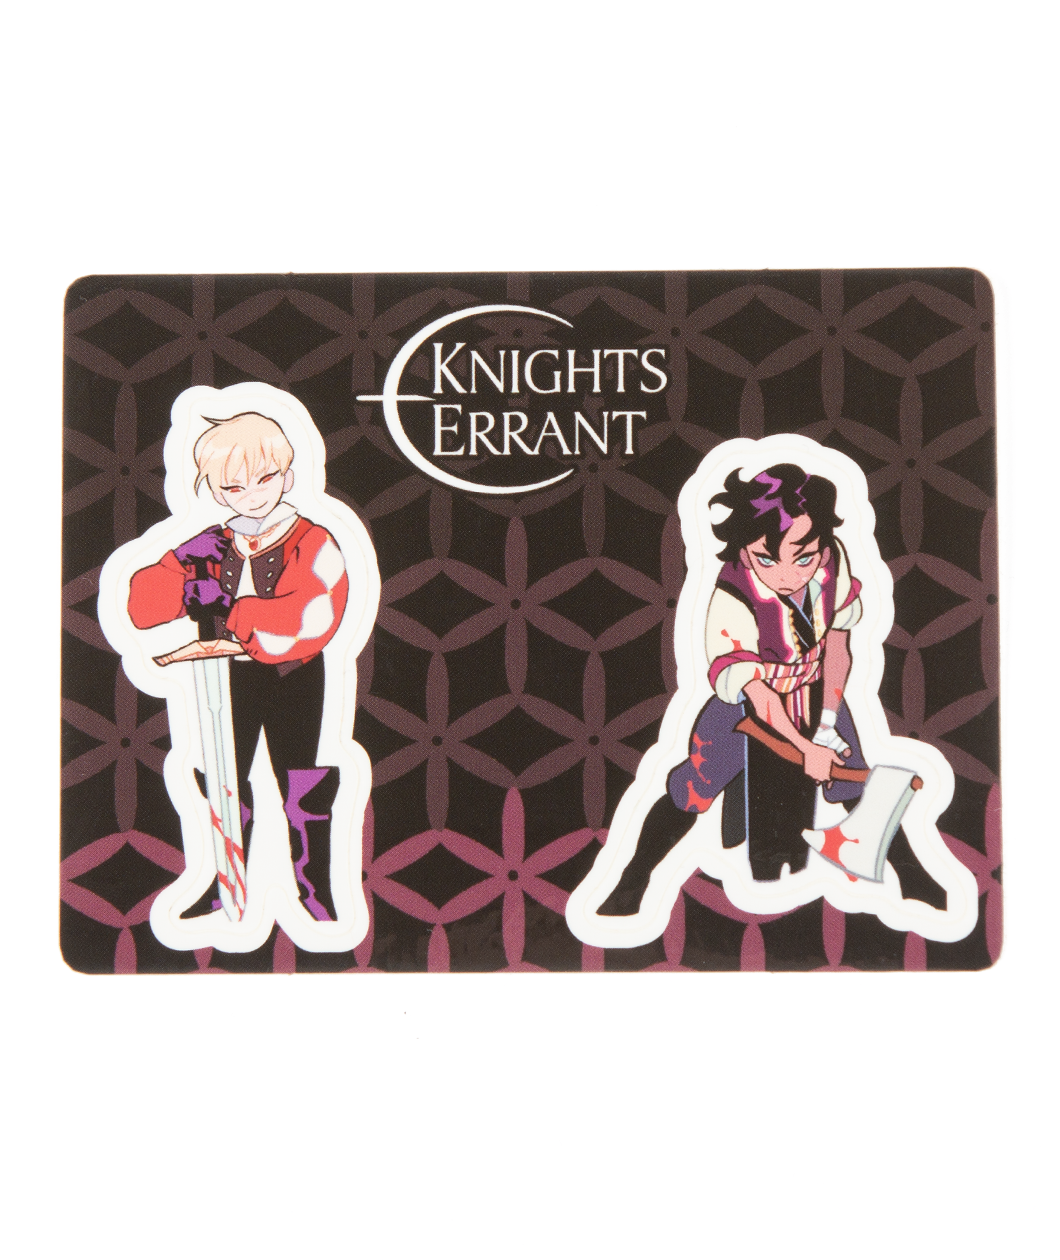 A standee of a person holding an axe with blood on it and another person holding a sword with the tip to the ground with blood on it on  backing with "Knights Errant". 